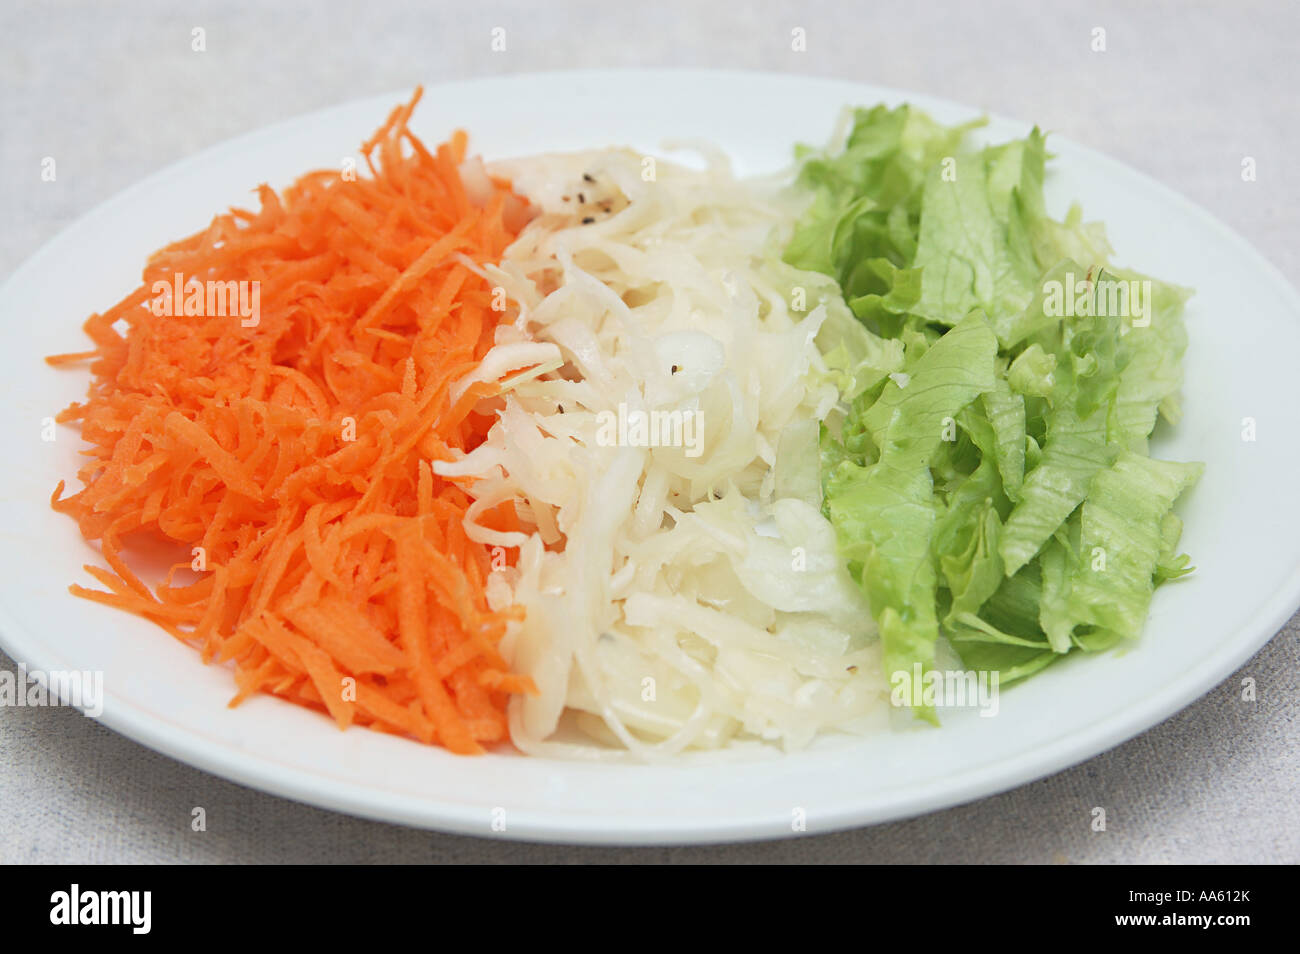 ANG103954 Food Salad grated carrot chopped cabbage with vinegar and black pepper and Iceberg salad chopped Stock Photo